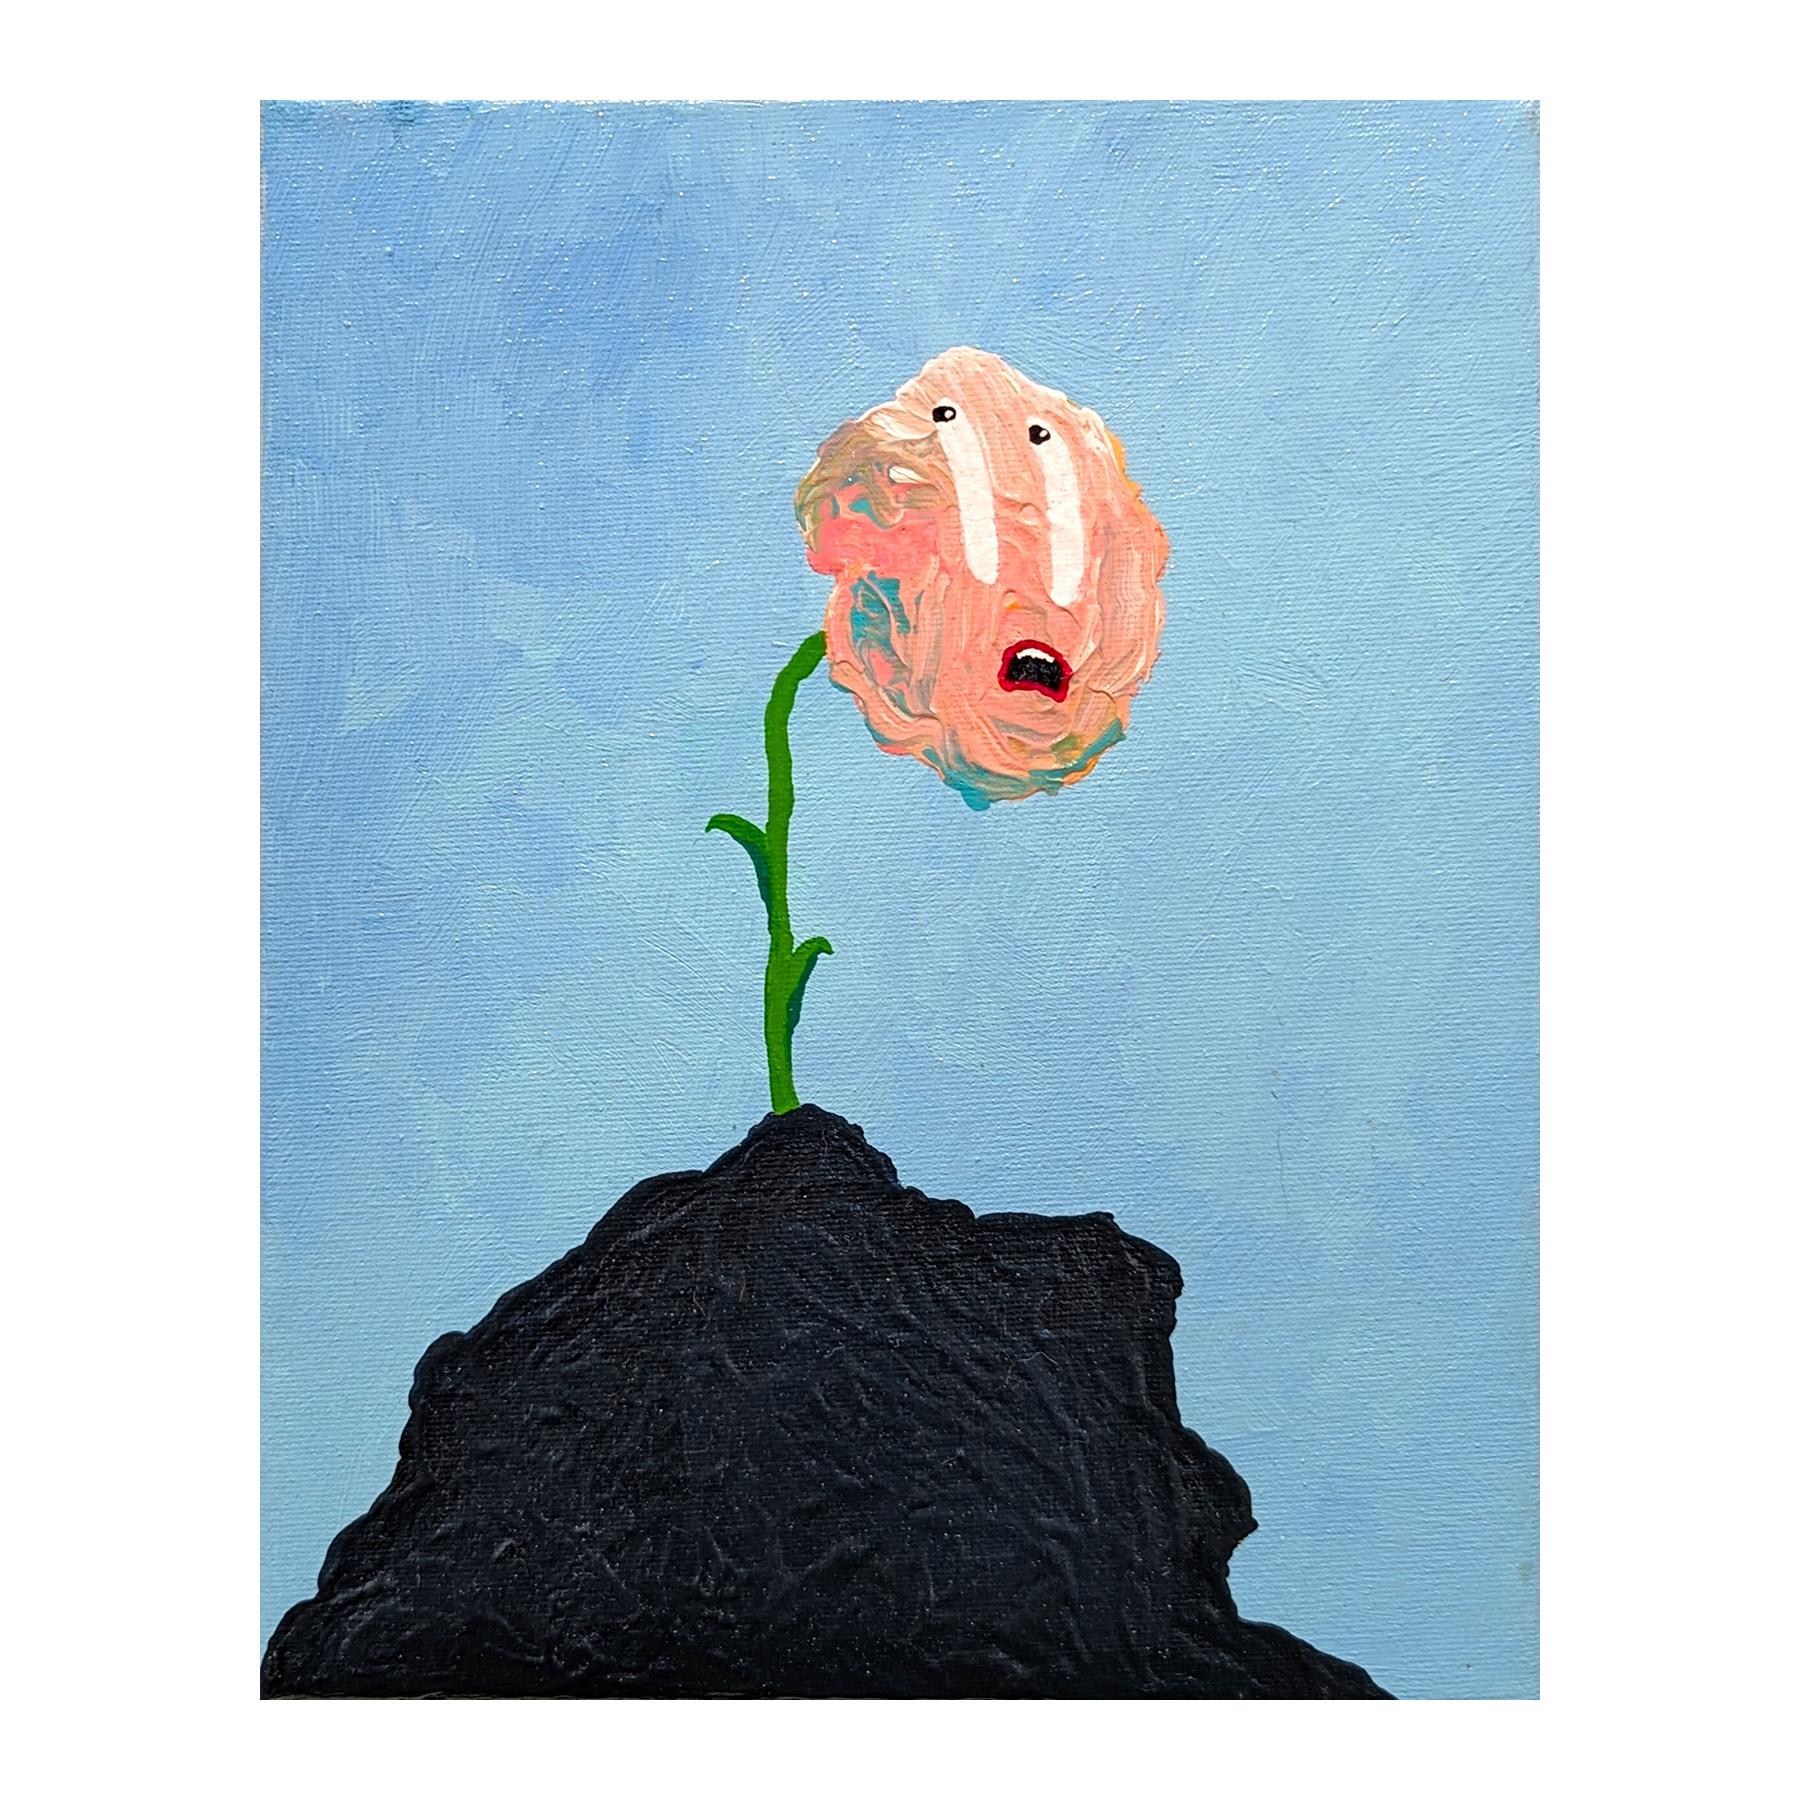 Colorful dark humor painting by Memphis-based contemporary artist Alex Paulus. The work features a central figurative plant creature looking up into the bright blue sky with a mixture of awe and dread. Currently unframed, but options are